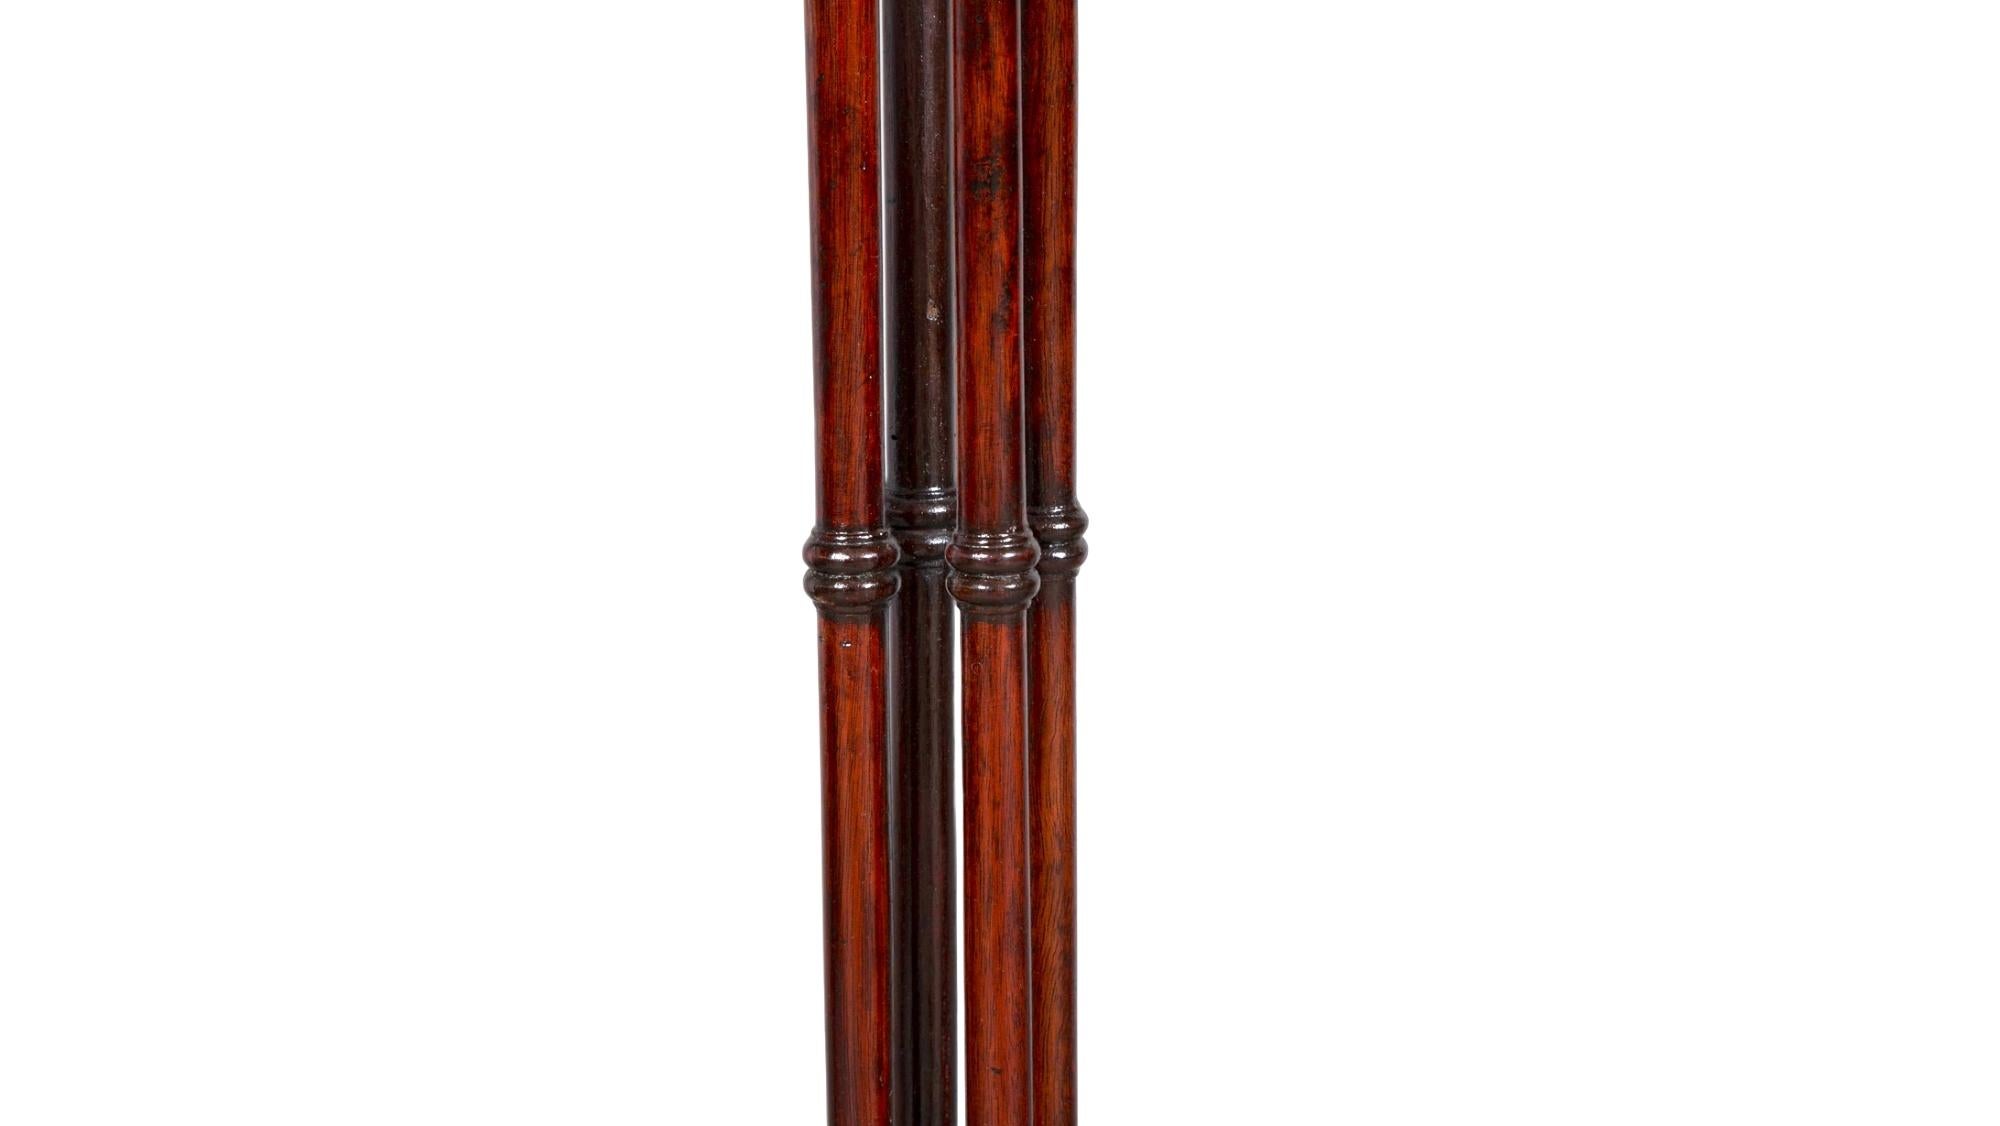 19th Century English Chippendale Style Pair Tripod Foot Candle Stand / Pedestal For Sale 2